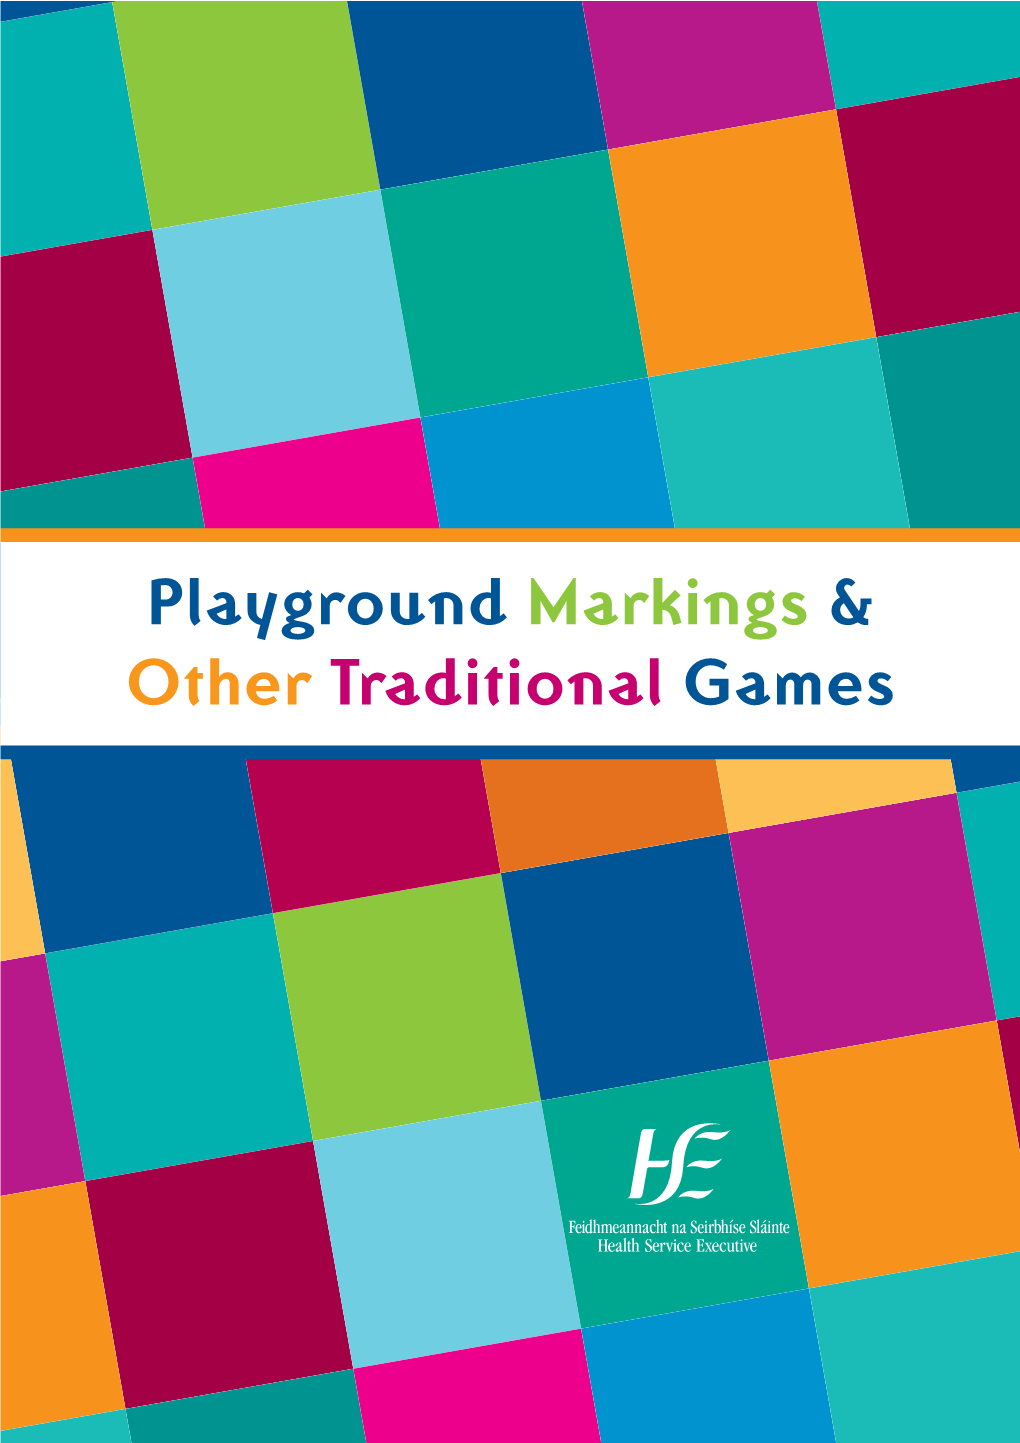 Playground Markings & Other Traditional Games